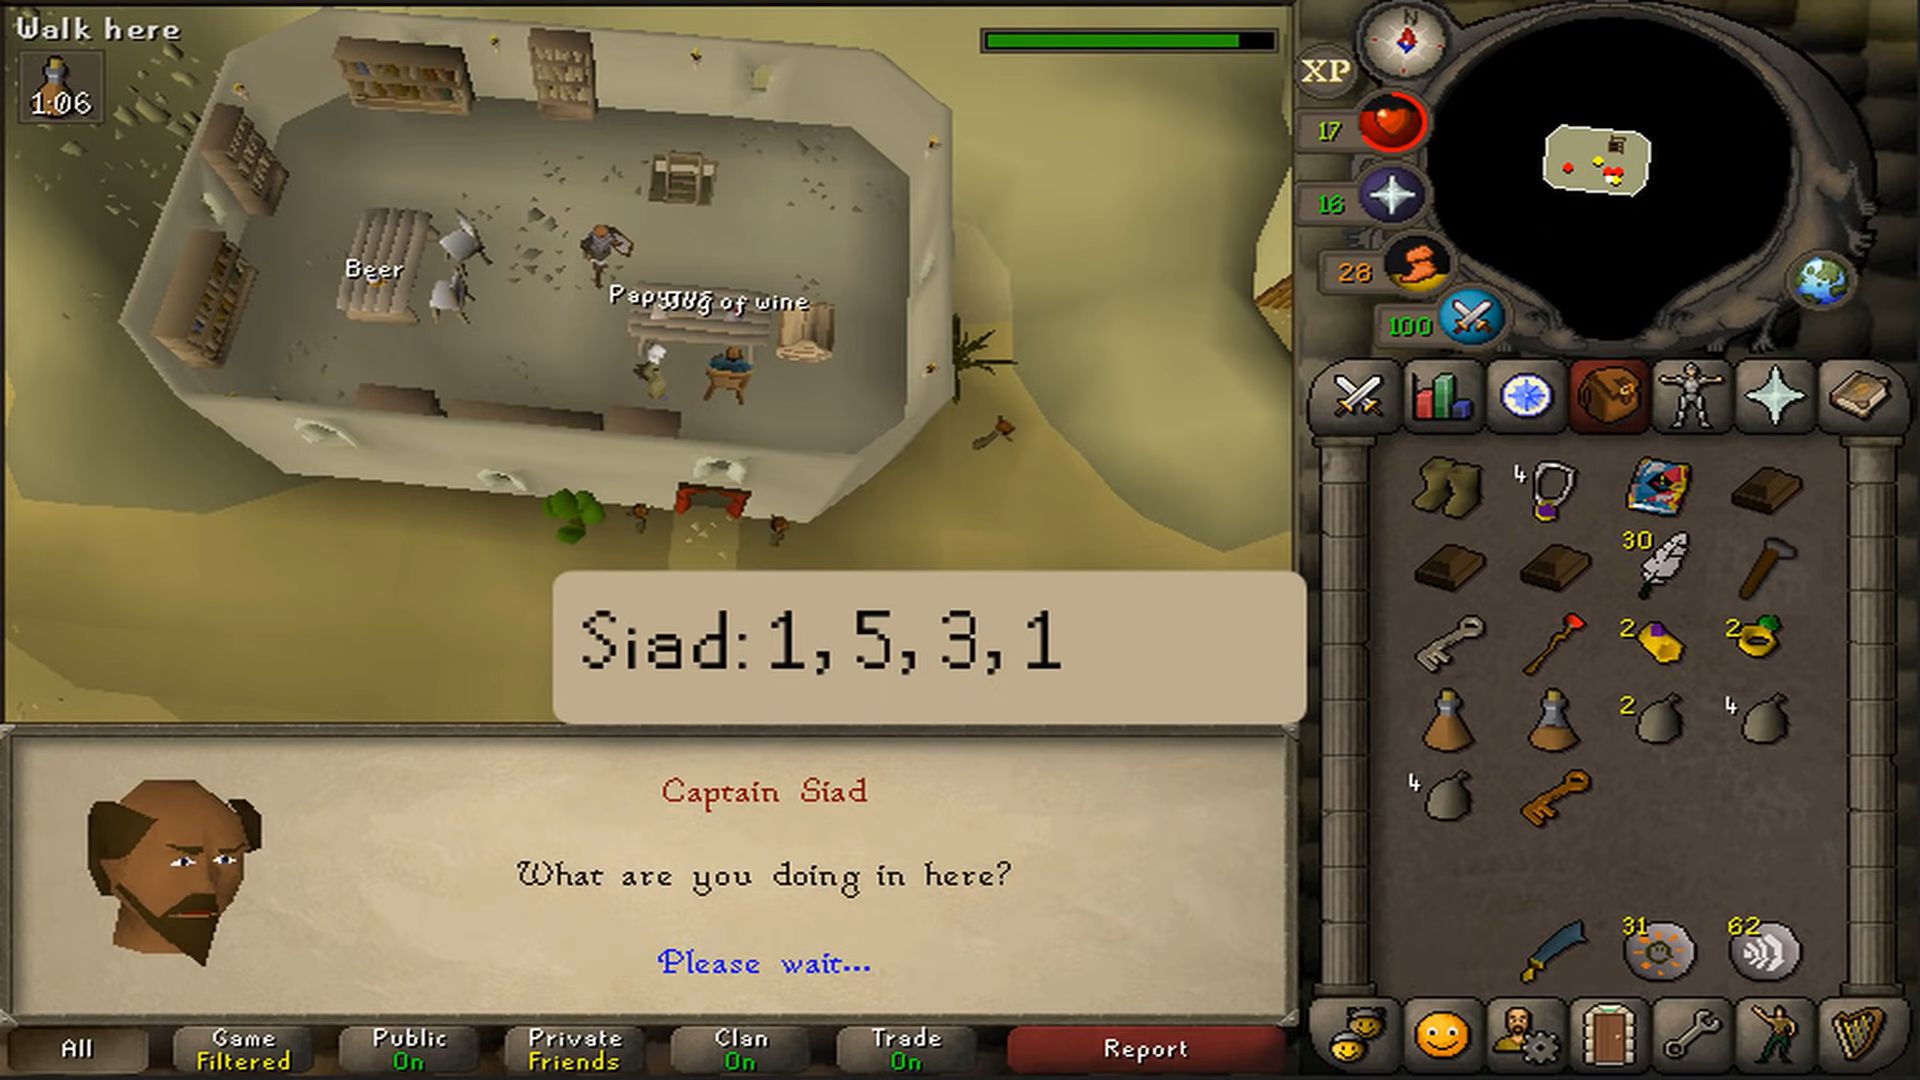 Osrs Tourist Trap Quest Distact Siad to Get the plans